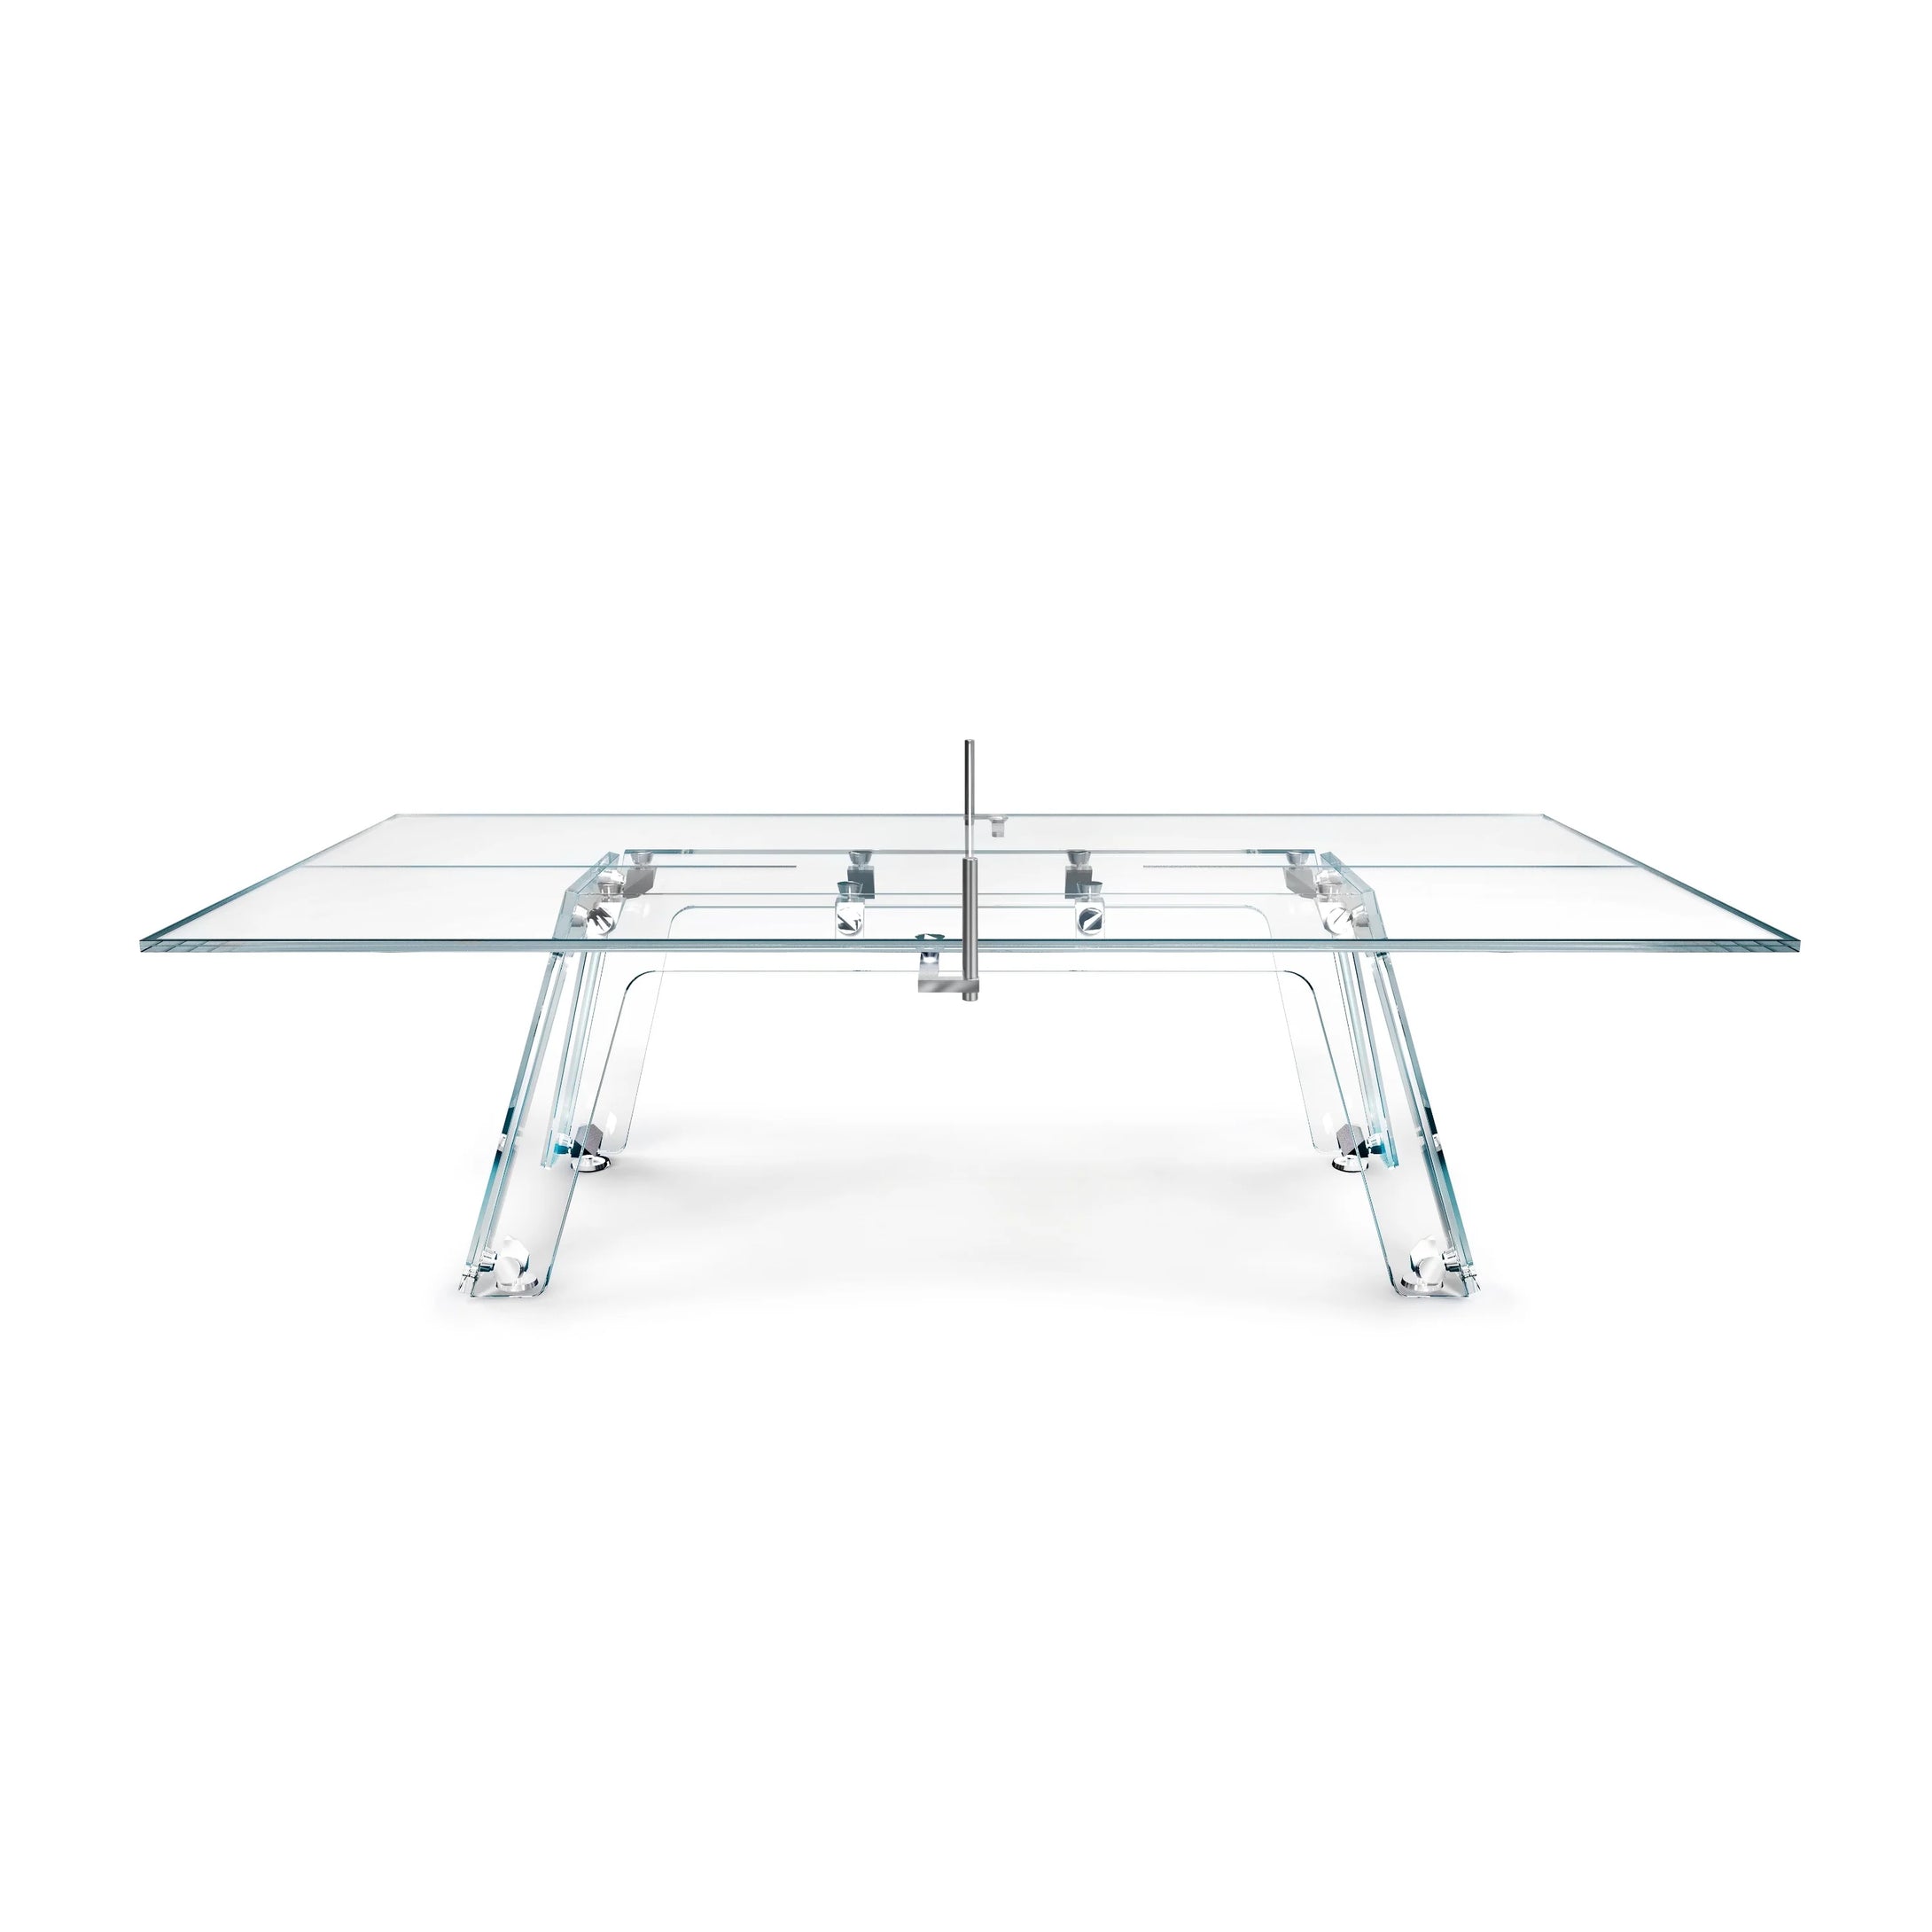 Impatia Lungolinea Ping Pong Table